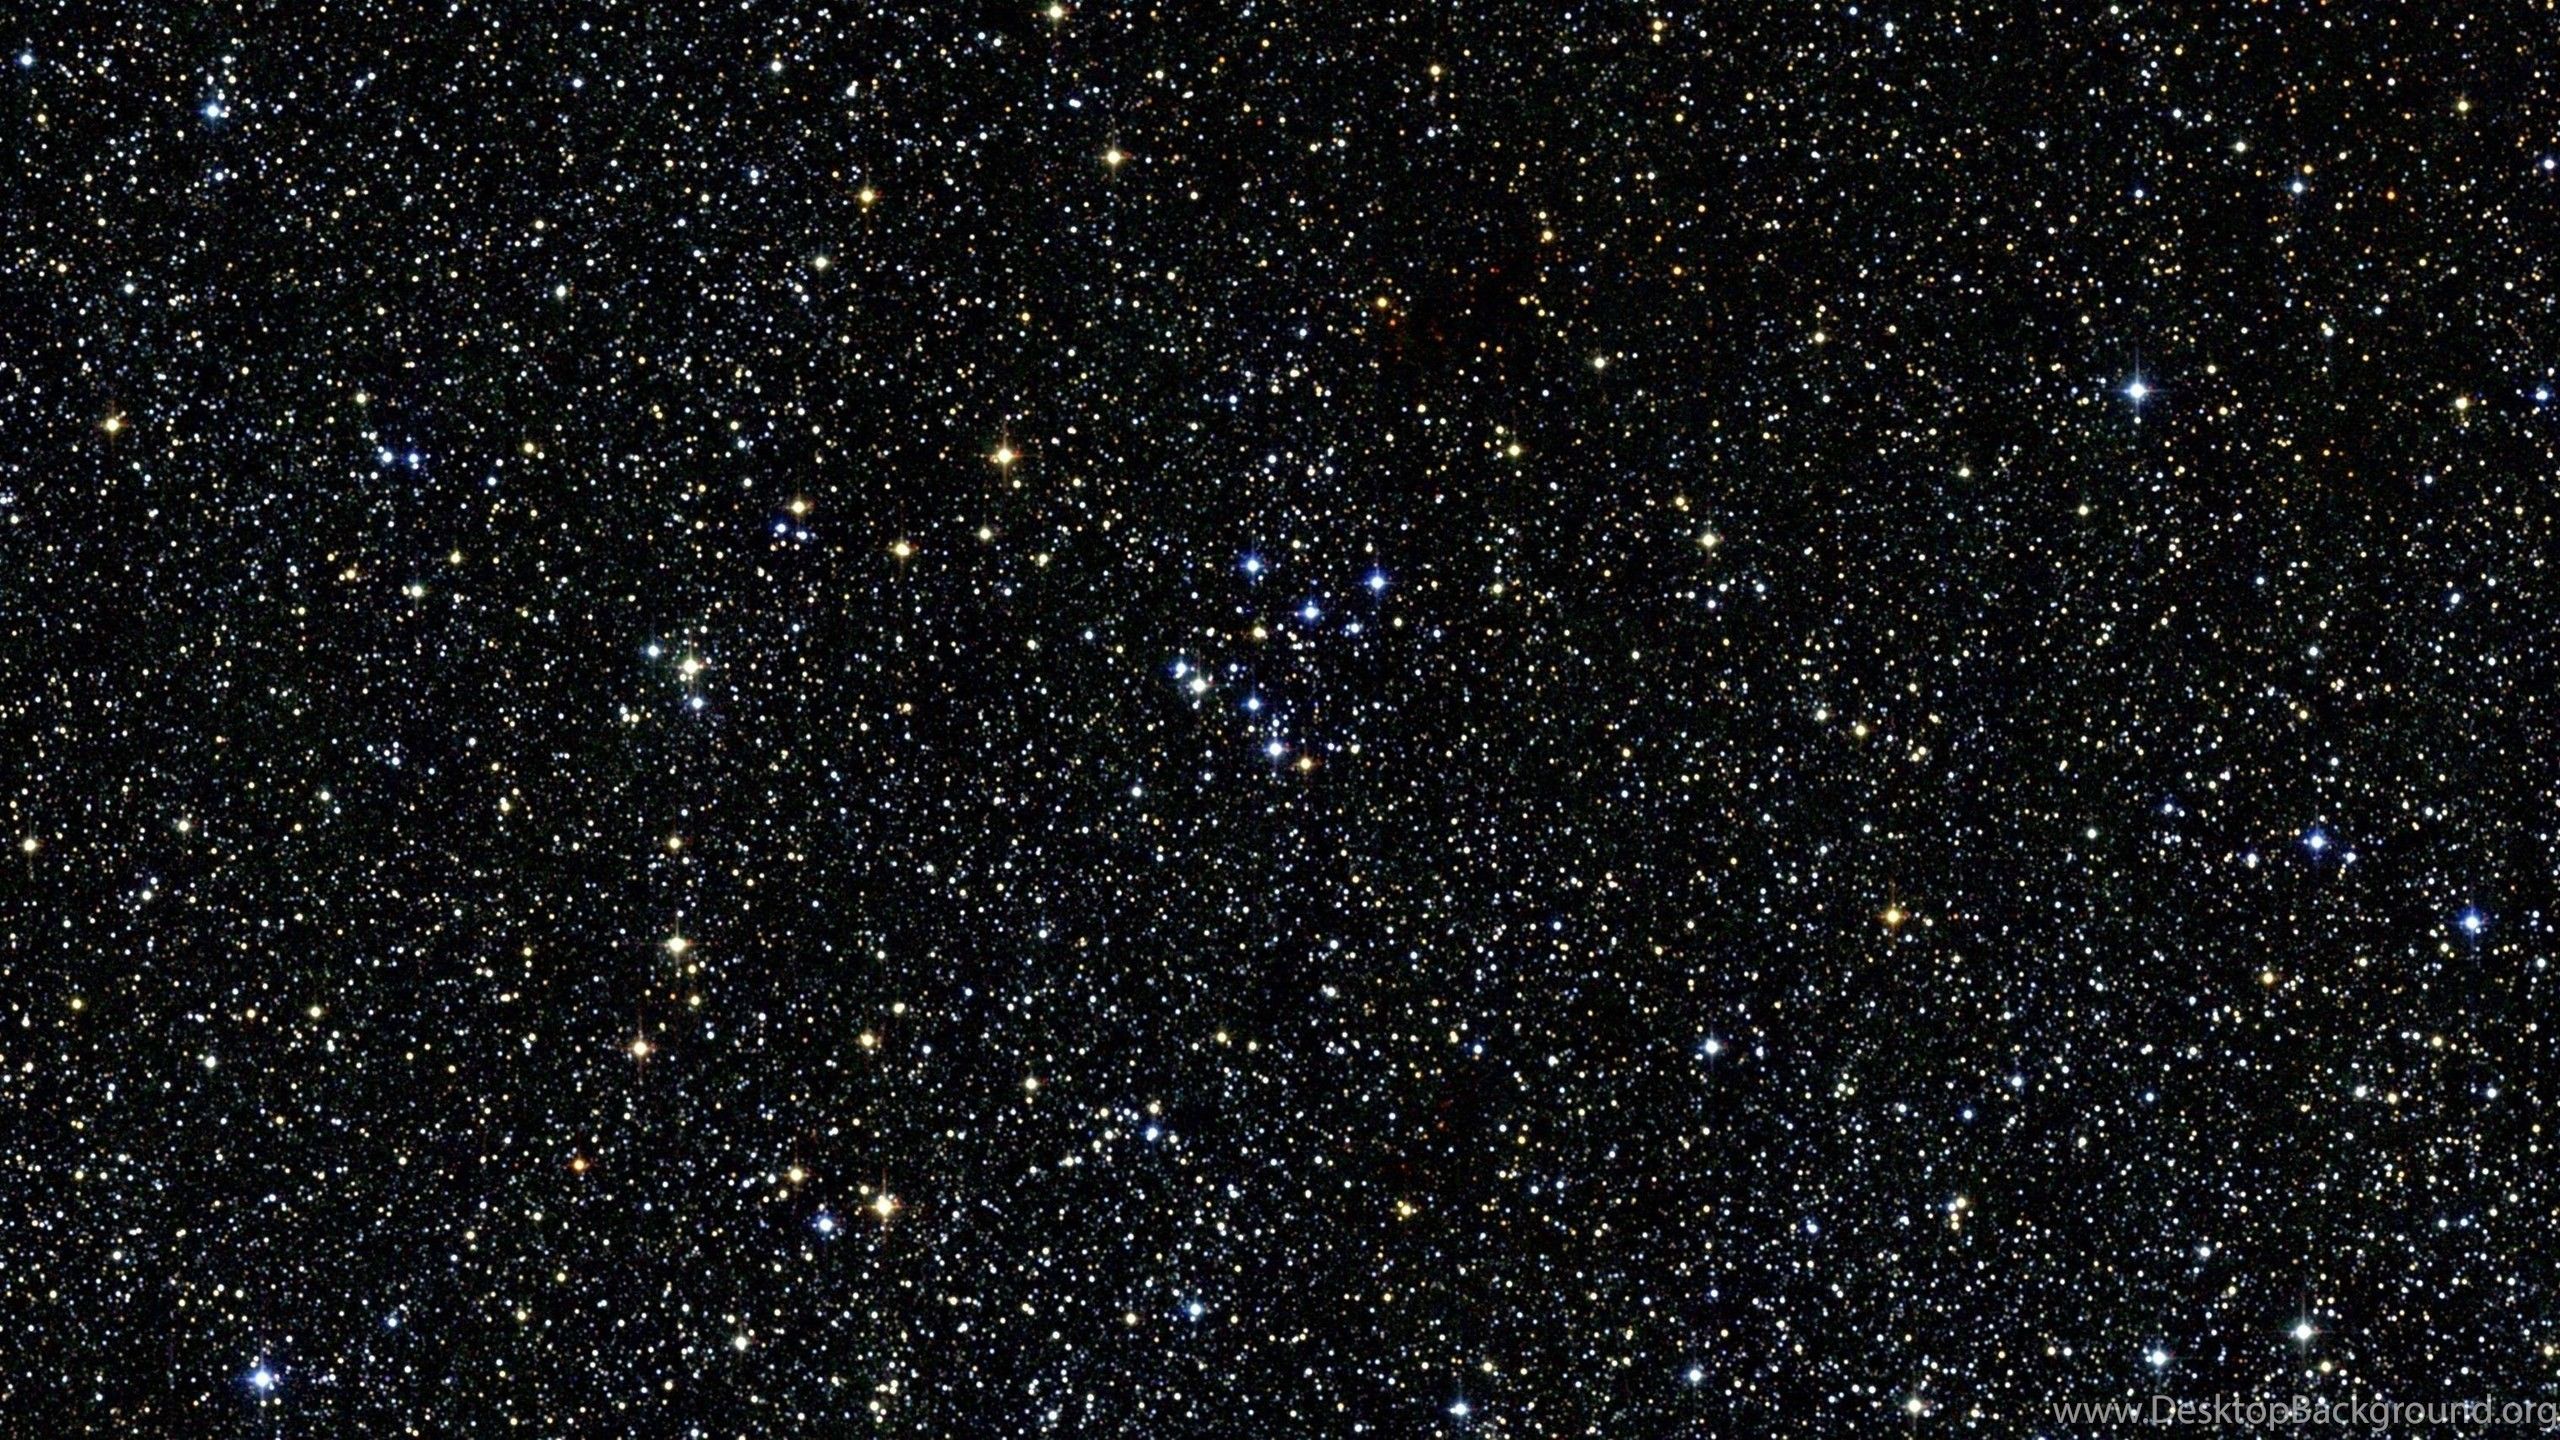 The open star cluster Messier 7 is a young open cluster located in the constellation of Cancer. - Constellation, stars